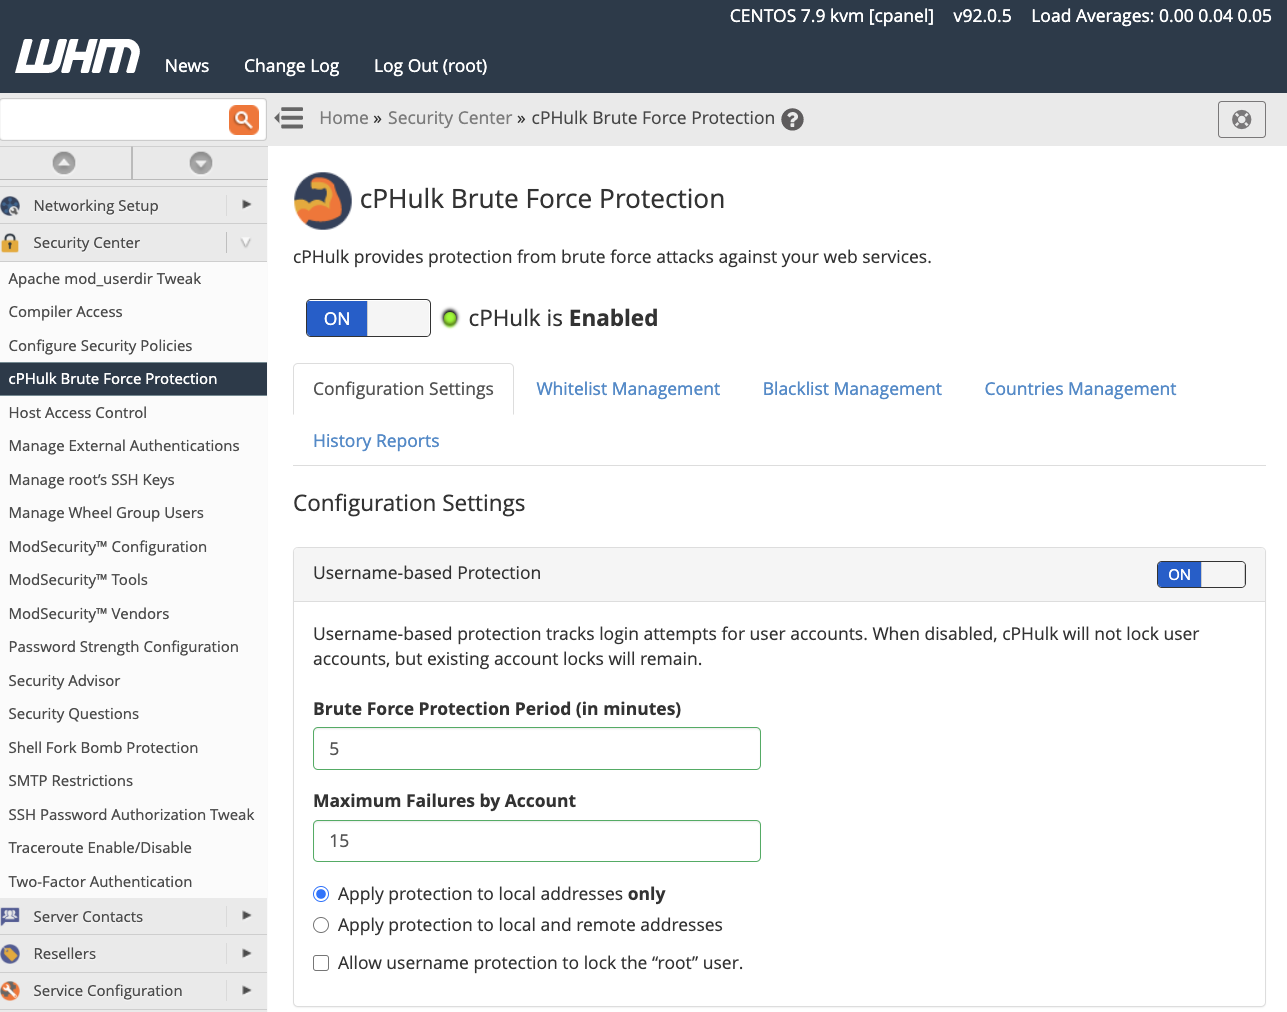 cPanel cPHulk Brute Force Protection